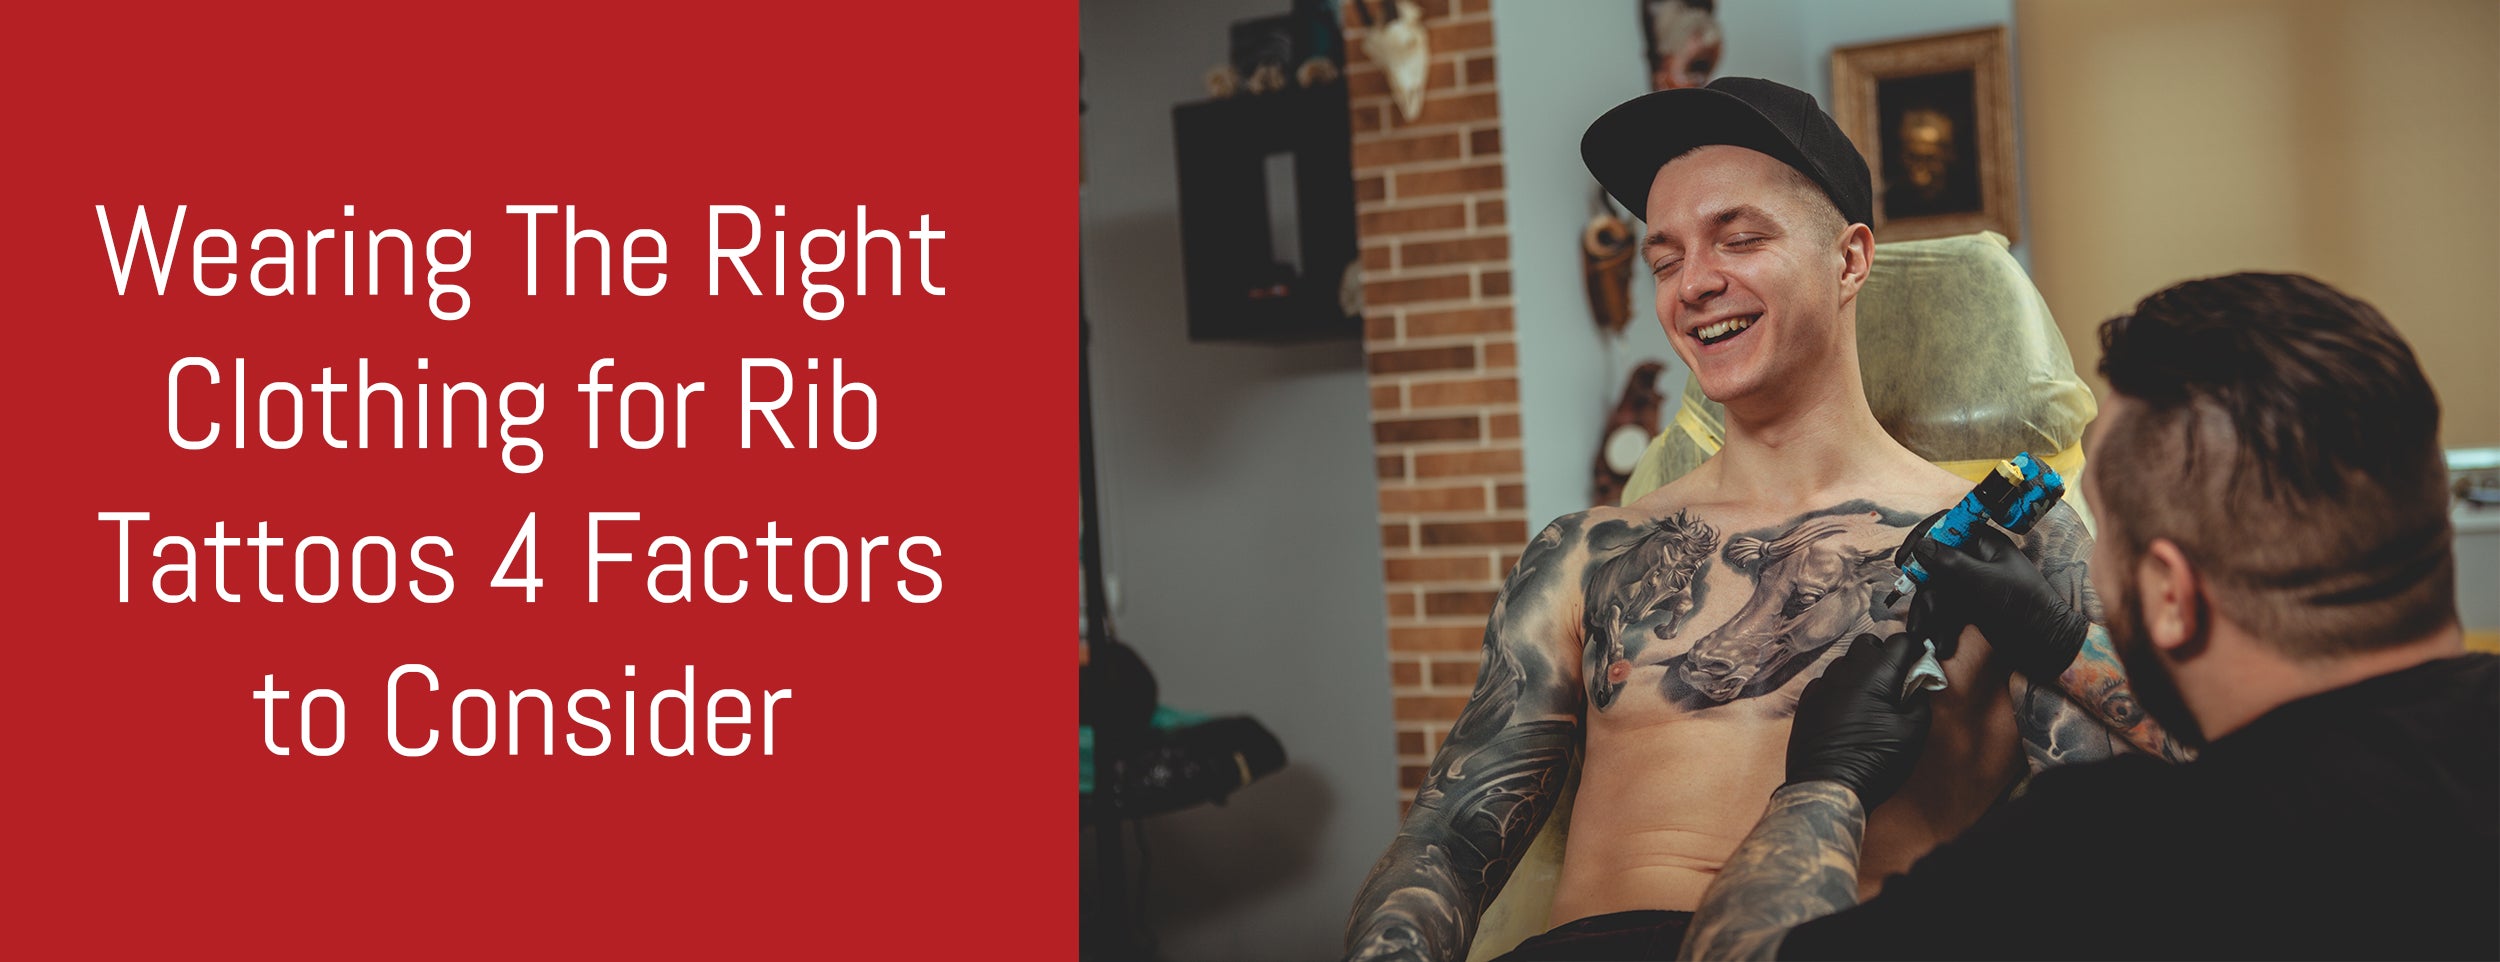 Factors to consider when choosing clothing for rib tattoos